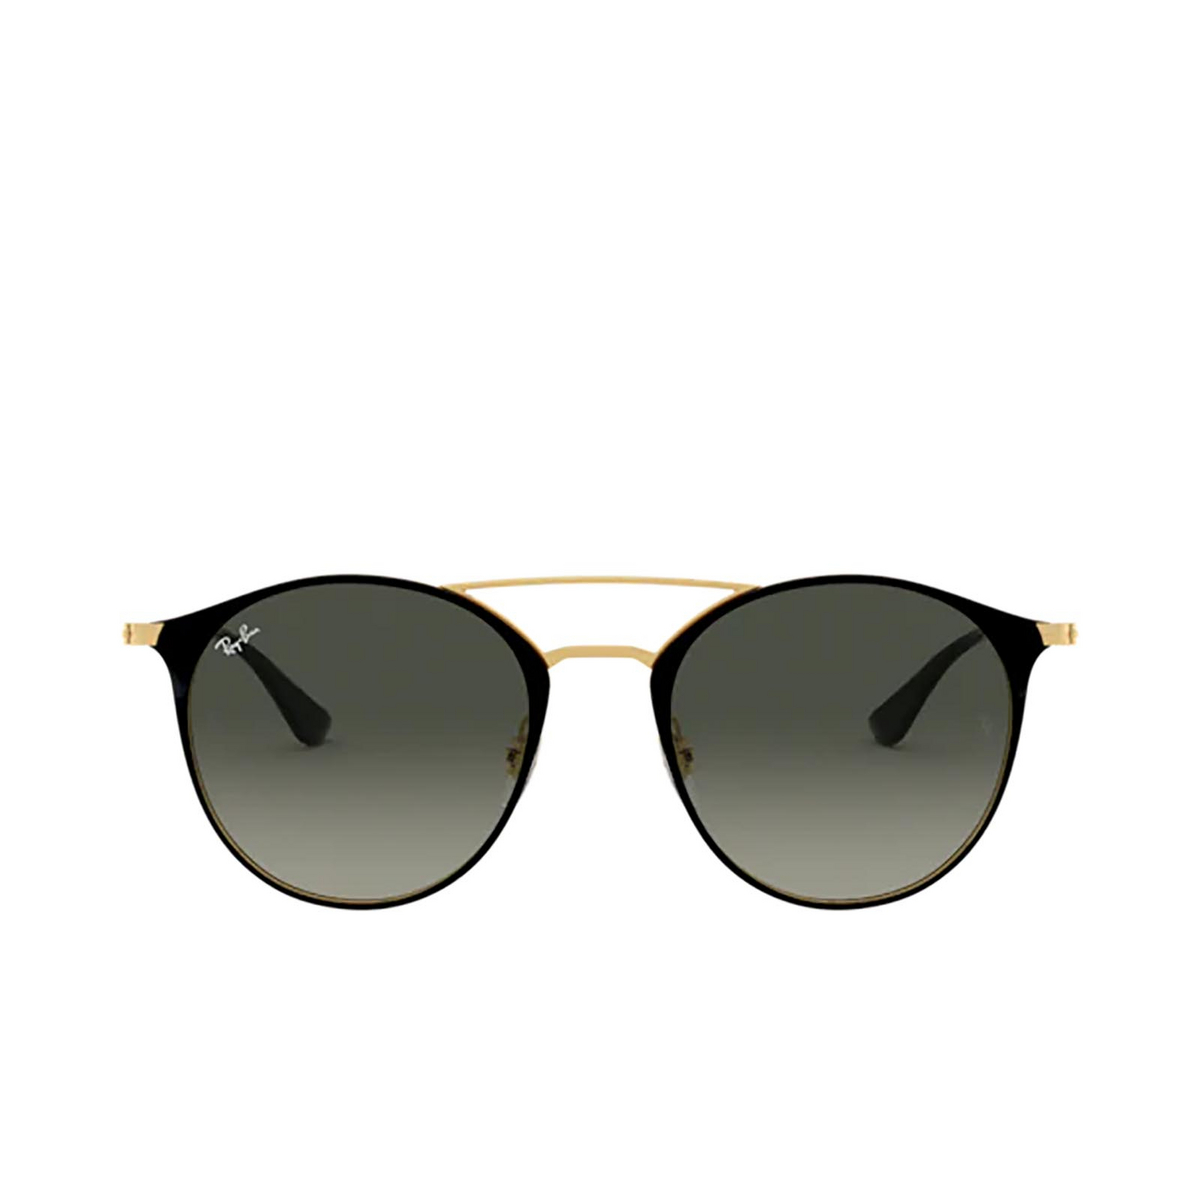 Ray-Ban® Round Sunglasses: RB3546 color Black On Arista 187/71 - 1/3.